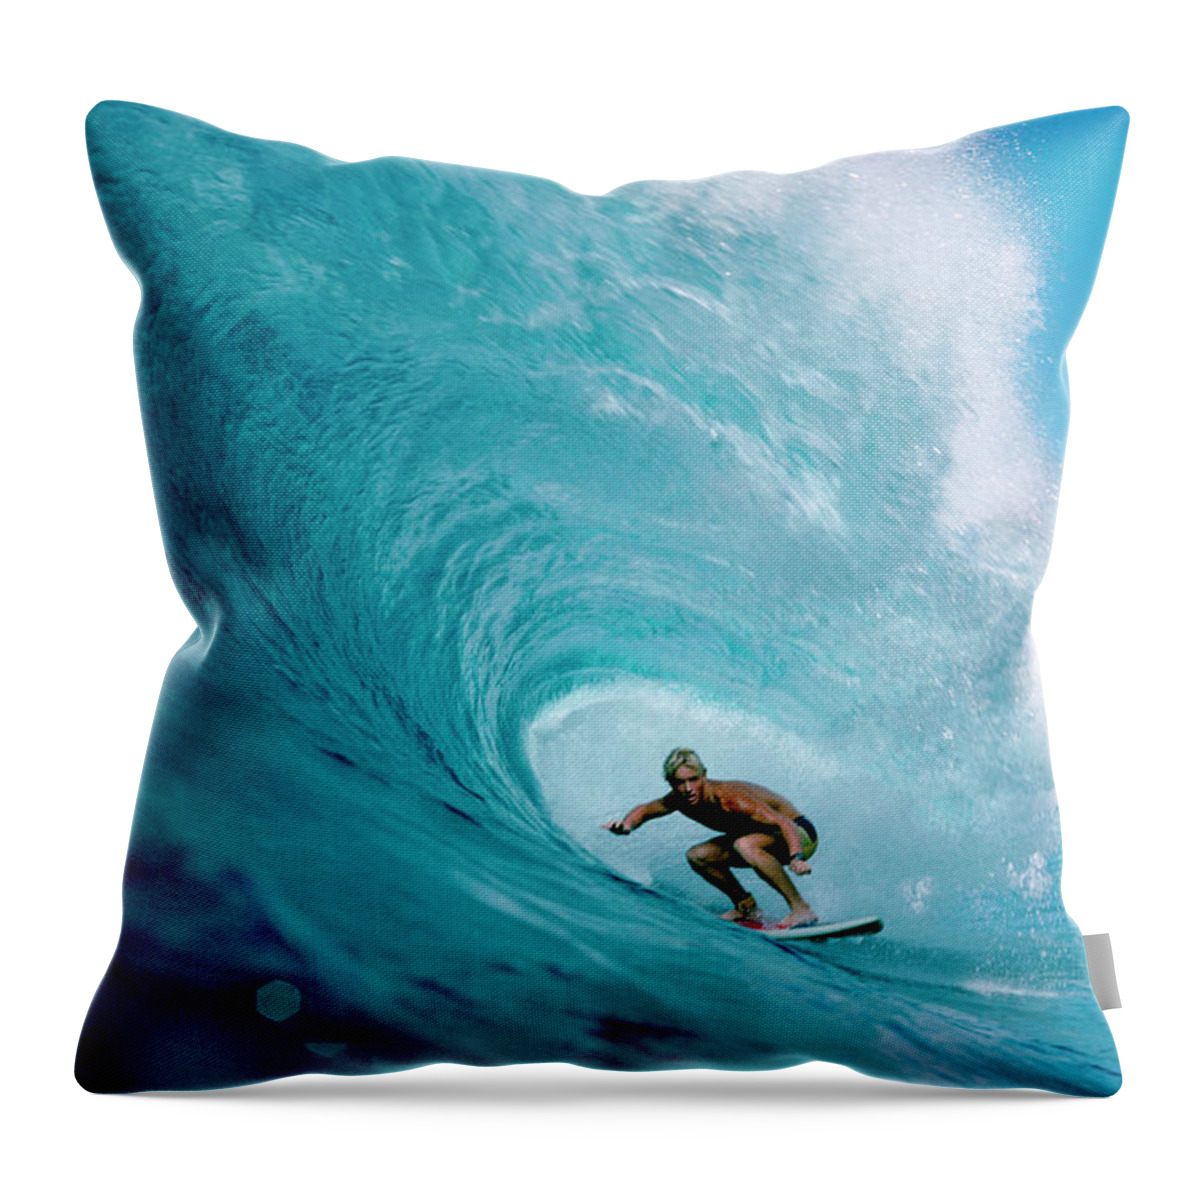 Photography Throw Pillow featuring the photograph Man Surfing In The Sea #5 by Panoramic Images